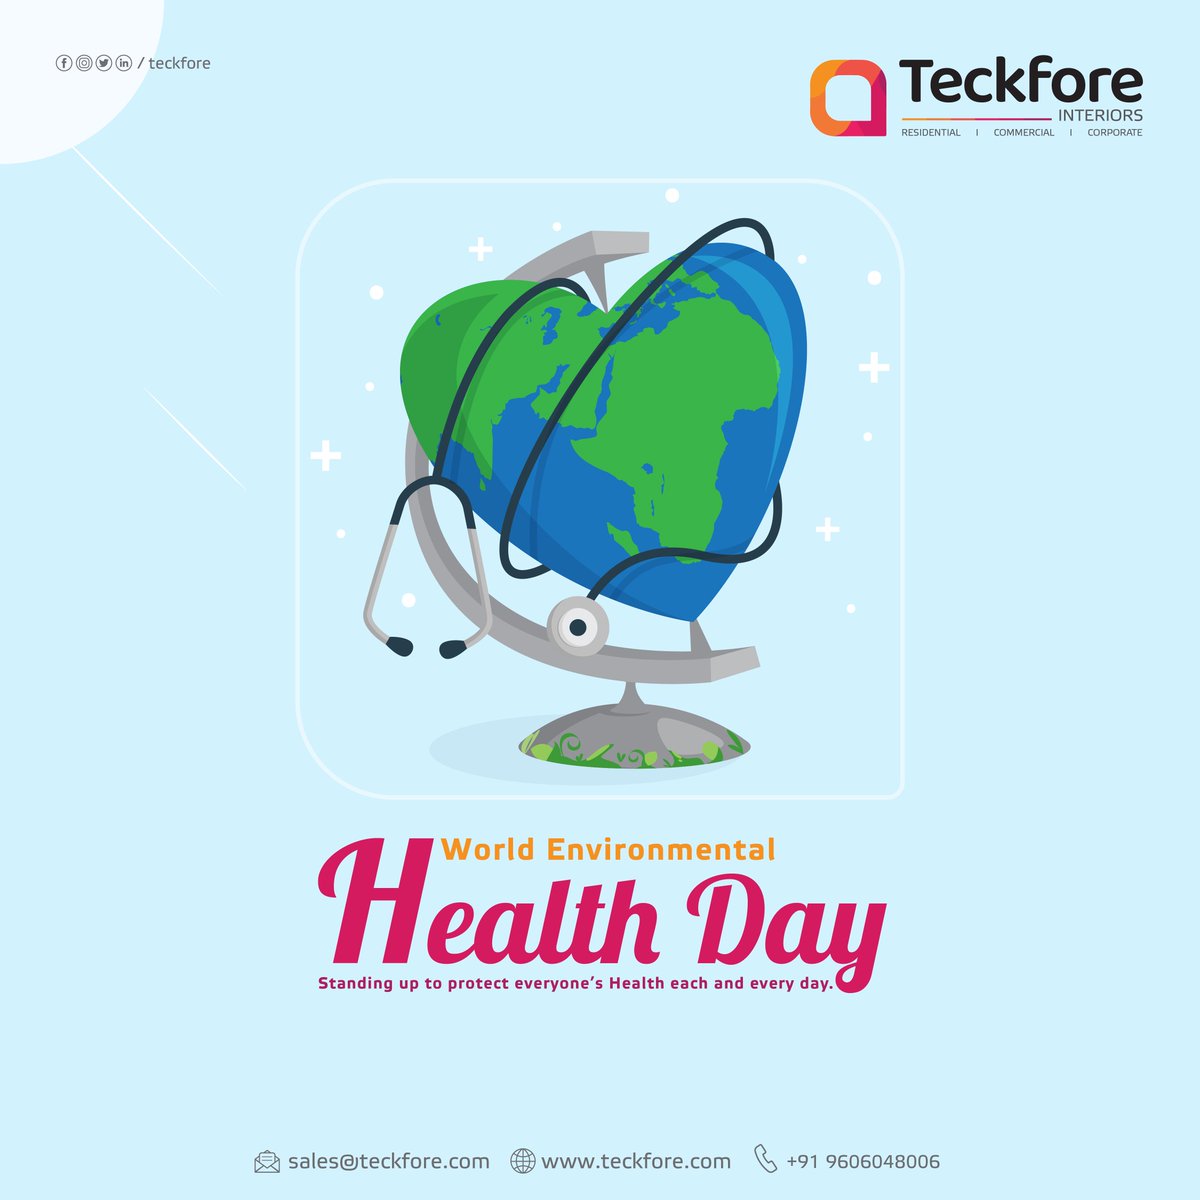 🌿 'Health is the treasure we all share. Let's guard it fiercely, every single day.' 💚 
#teckfore  #EnvironmentalHealthDay #ProtectOurHealth
#HealthForAll #SustainabilityMatters  #HealthyPlanetHealthyPeople  #GreenLiving
#StandUpForHealth #GlobalWellness  #CommunityHealth